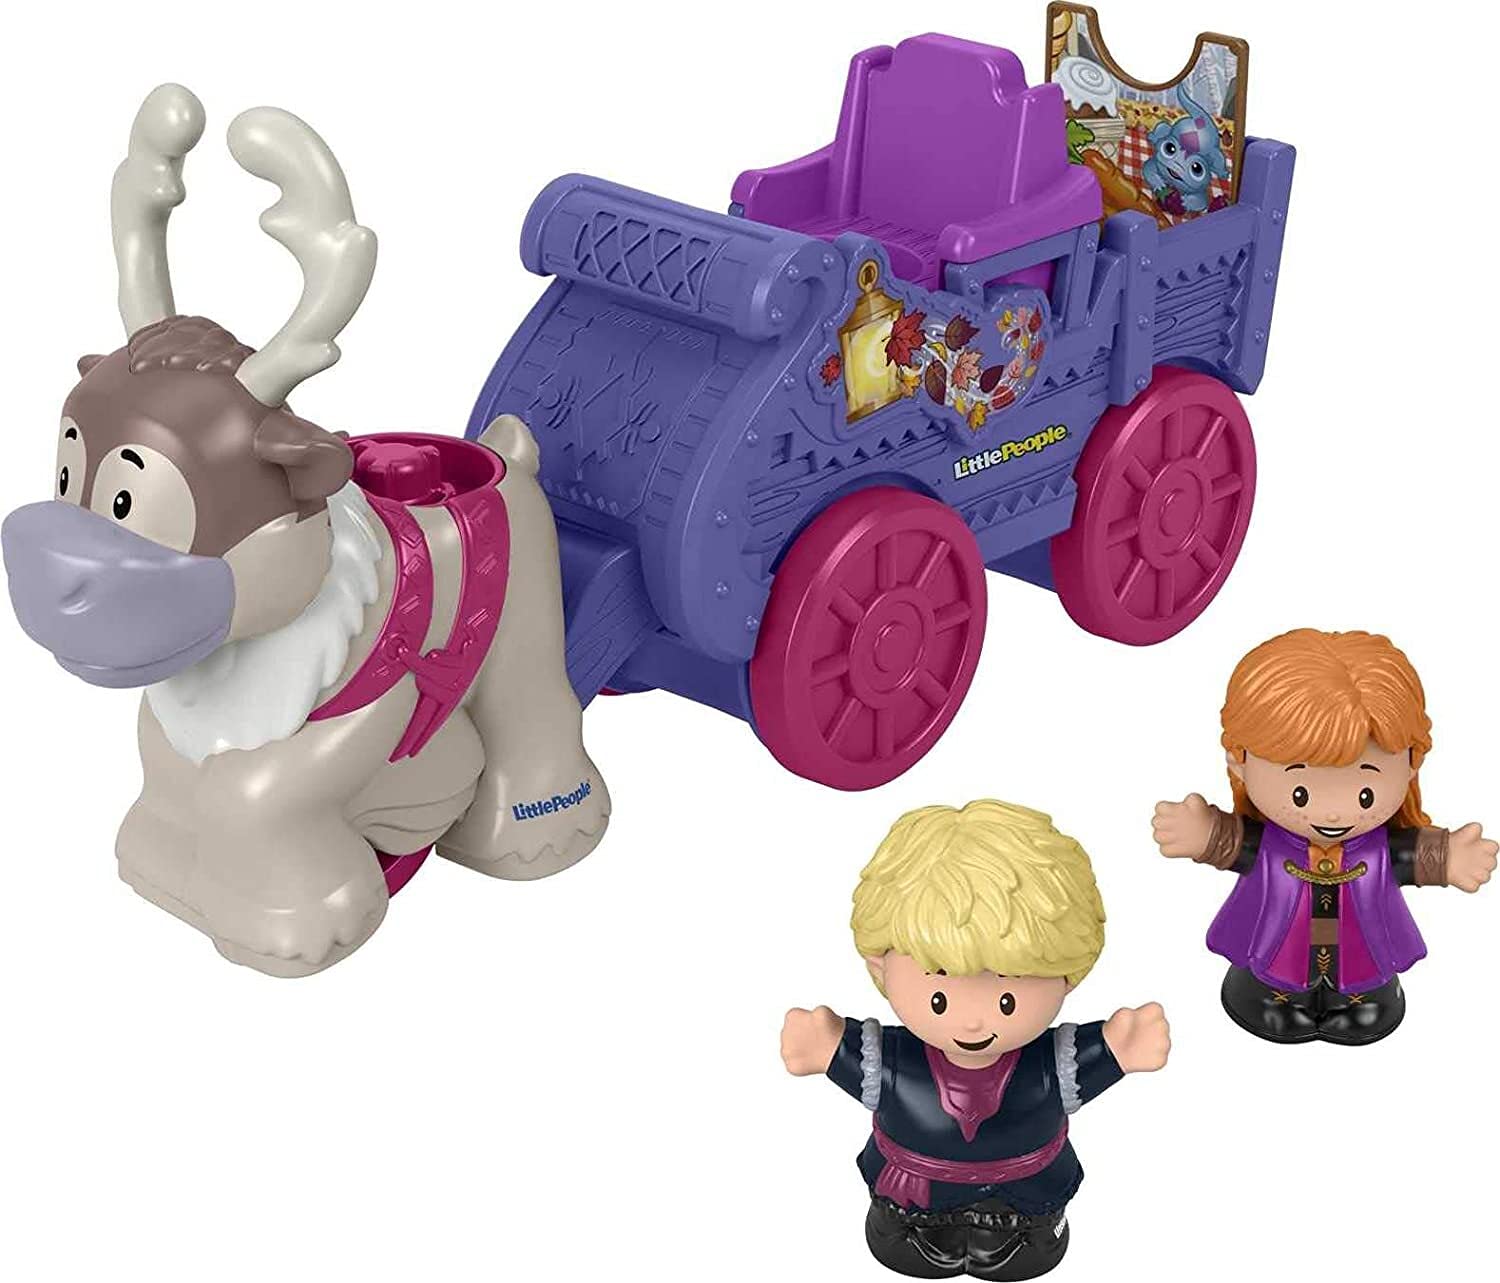 Fisher-Price Little People Disney Frozen 2 Anna & Kristoff's Wagon, Push-Along Vehicle with Character Figures for Toddlers and Preschool Kids